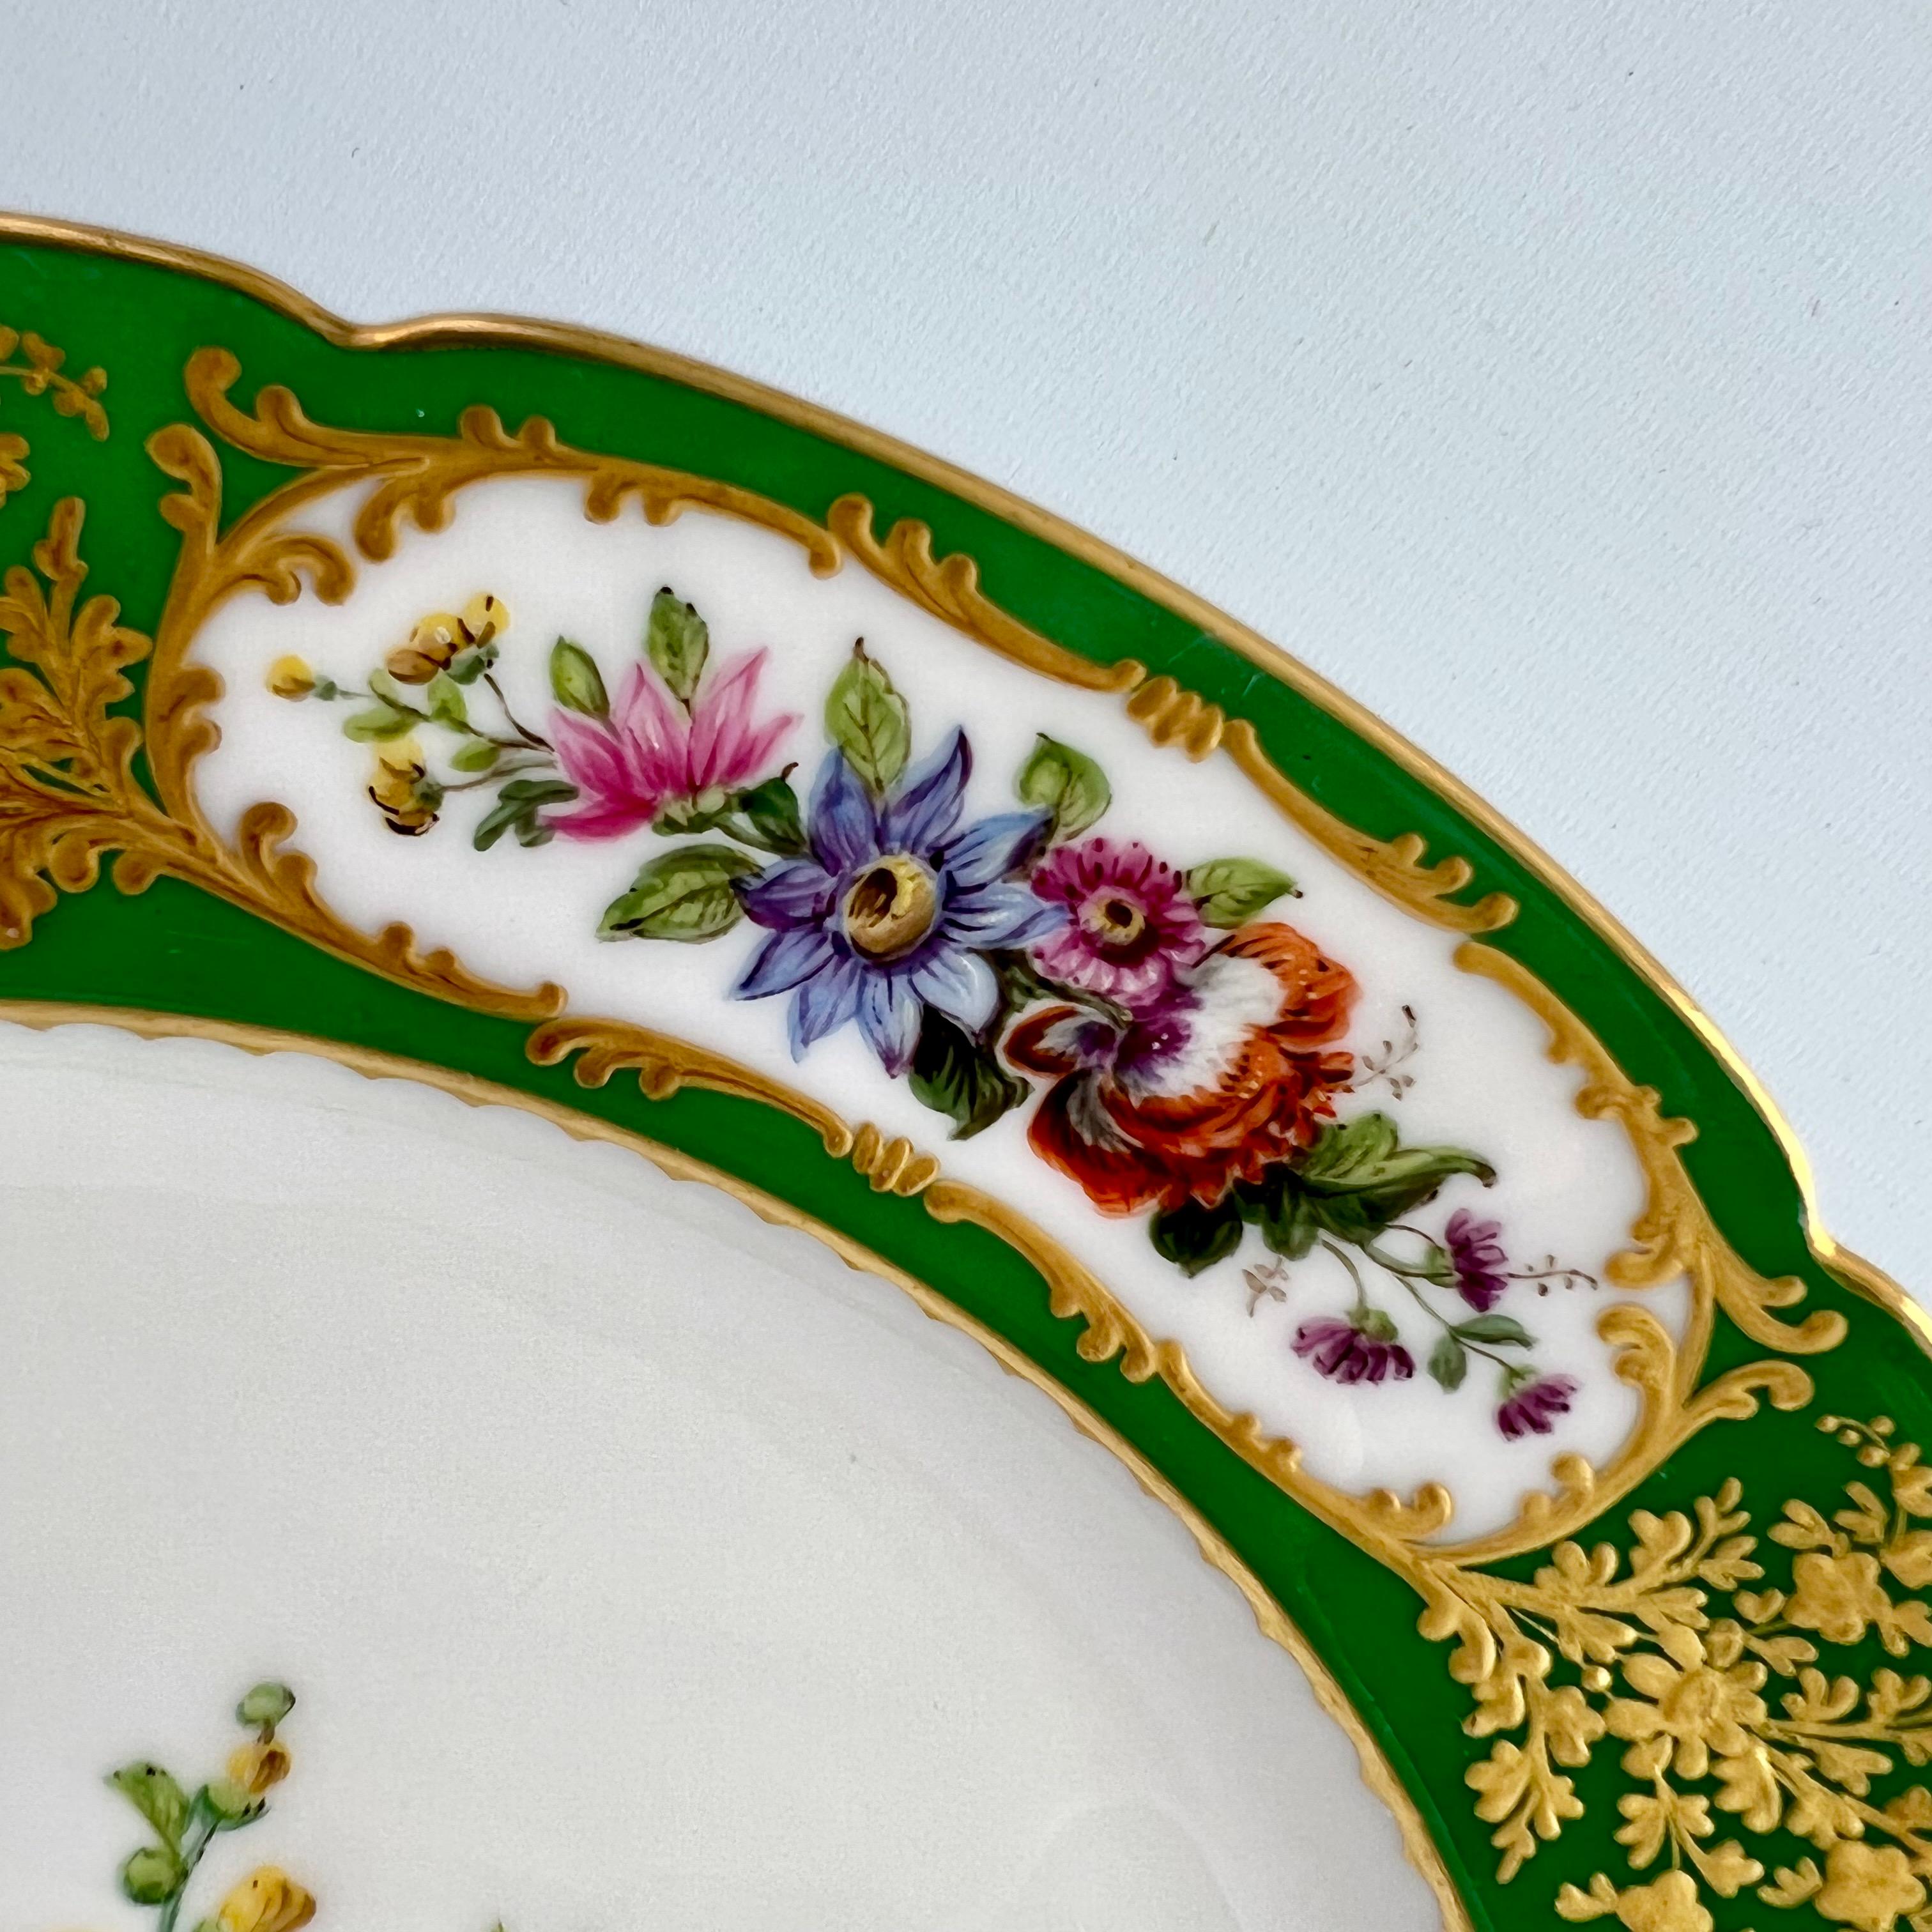 Vieux Paris Feuillet Set of 6 Plates, French Green, Gilt and Flowers, 1817-1834 5